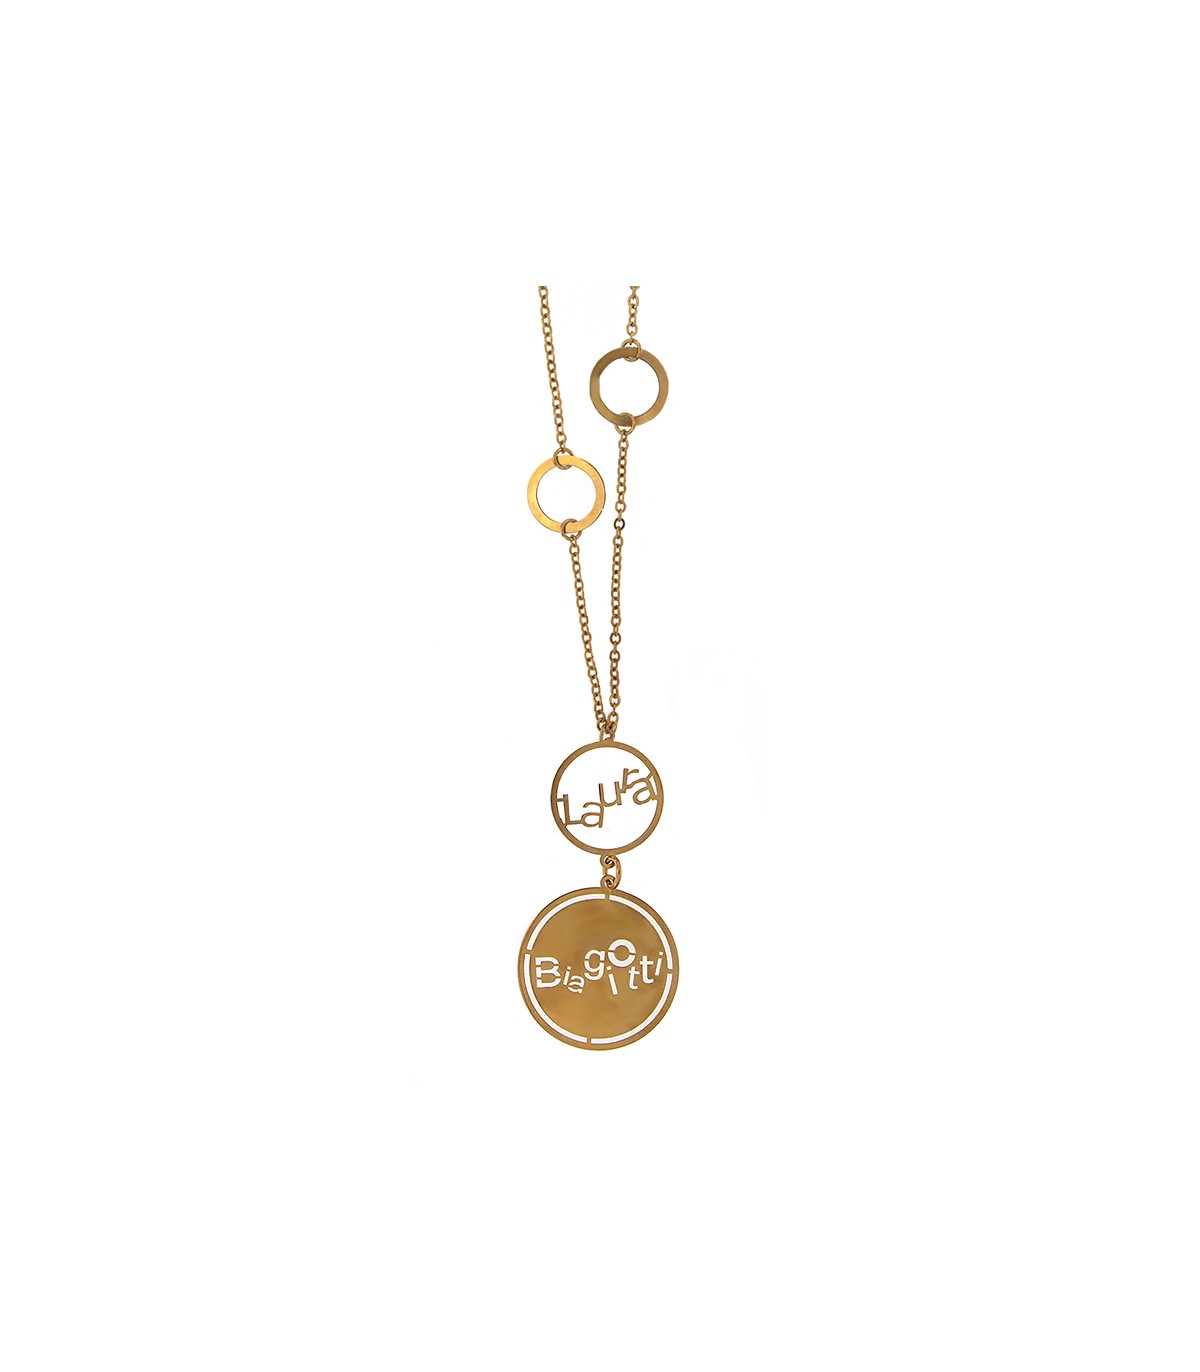 Laura Biagiotti Women's Necklace with Medallion - 0